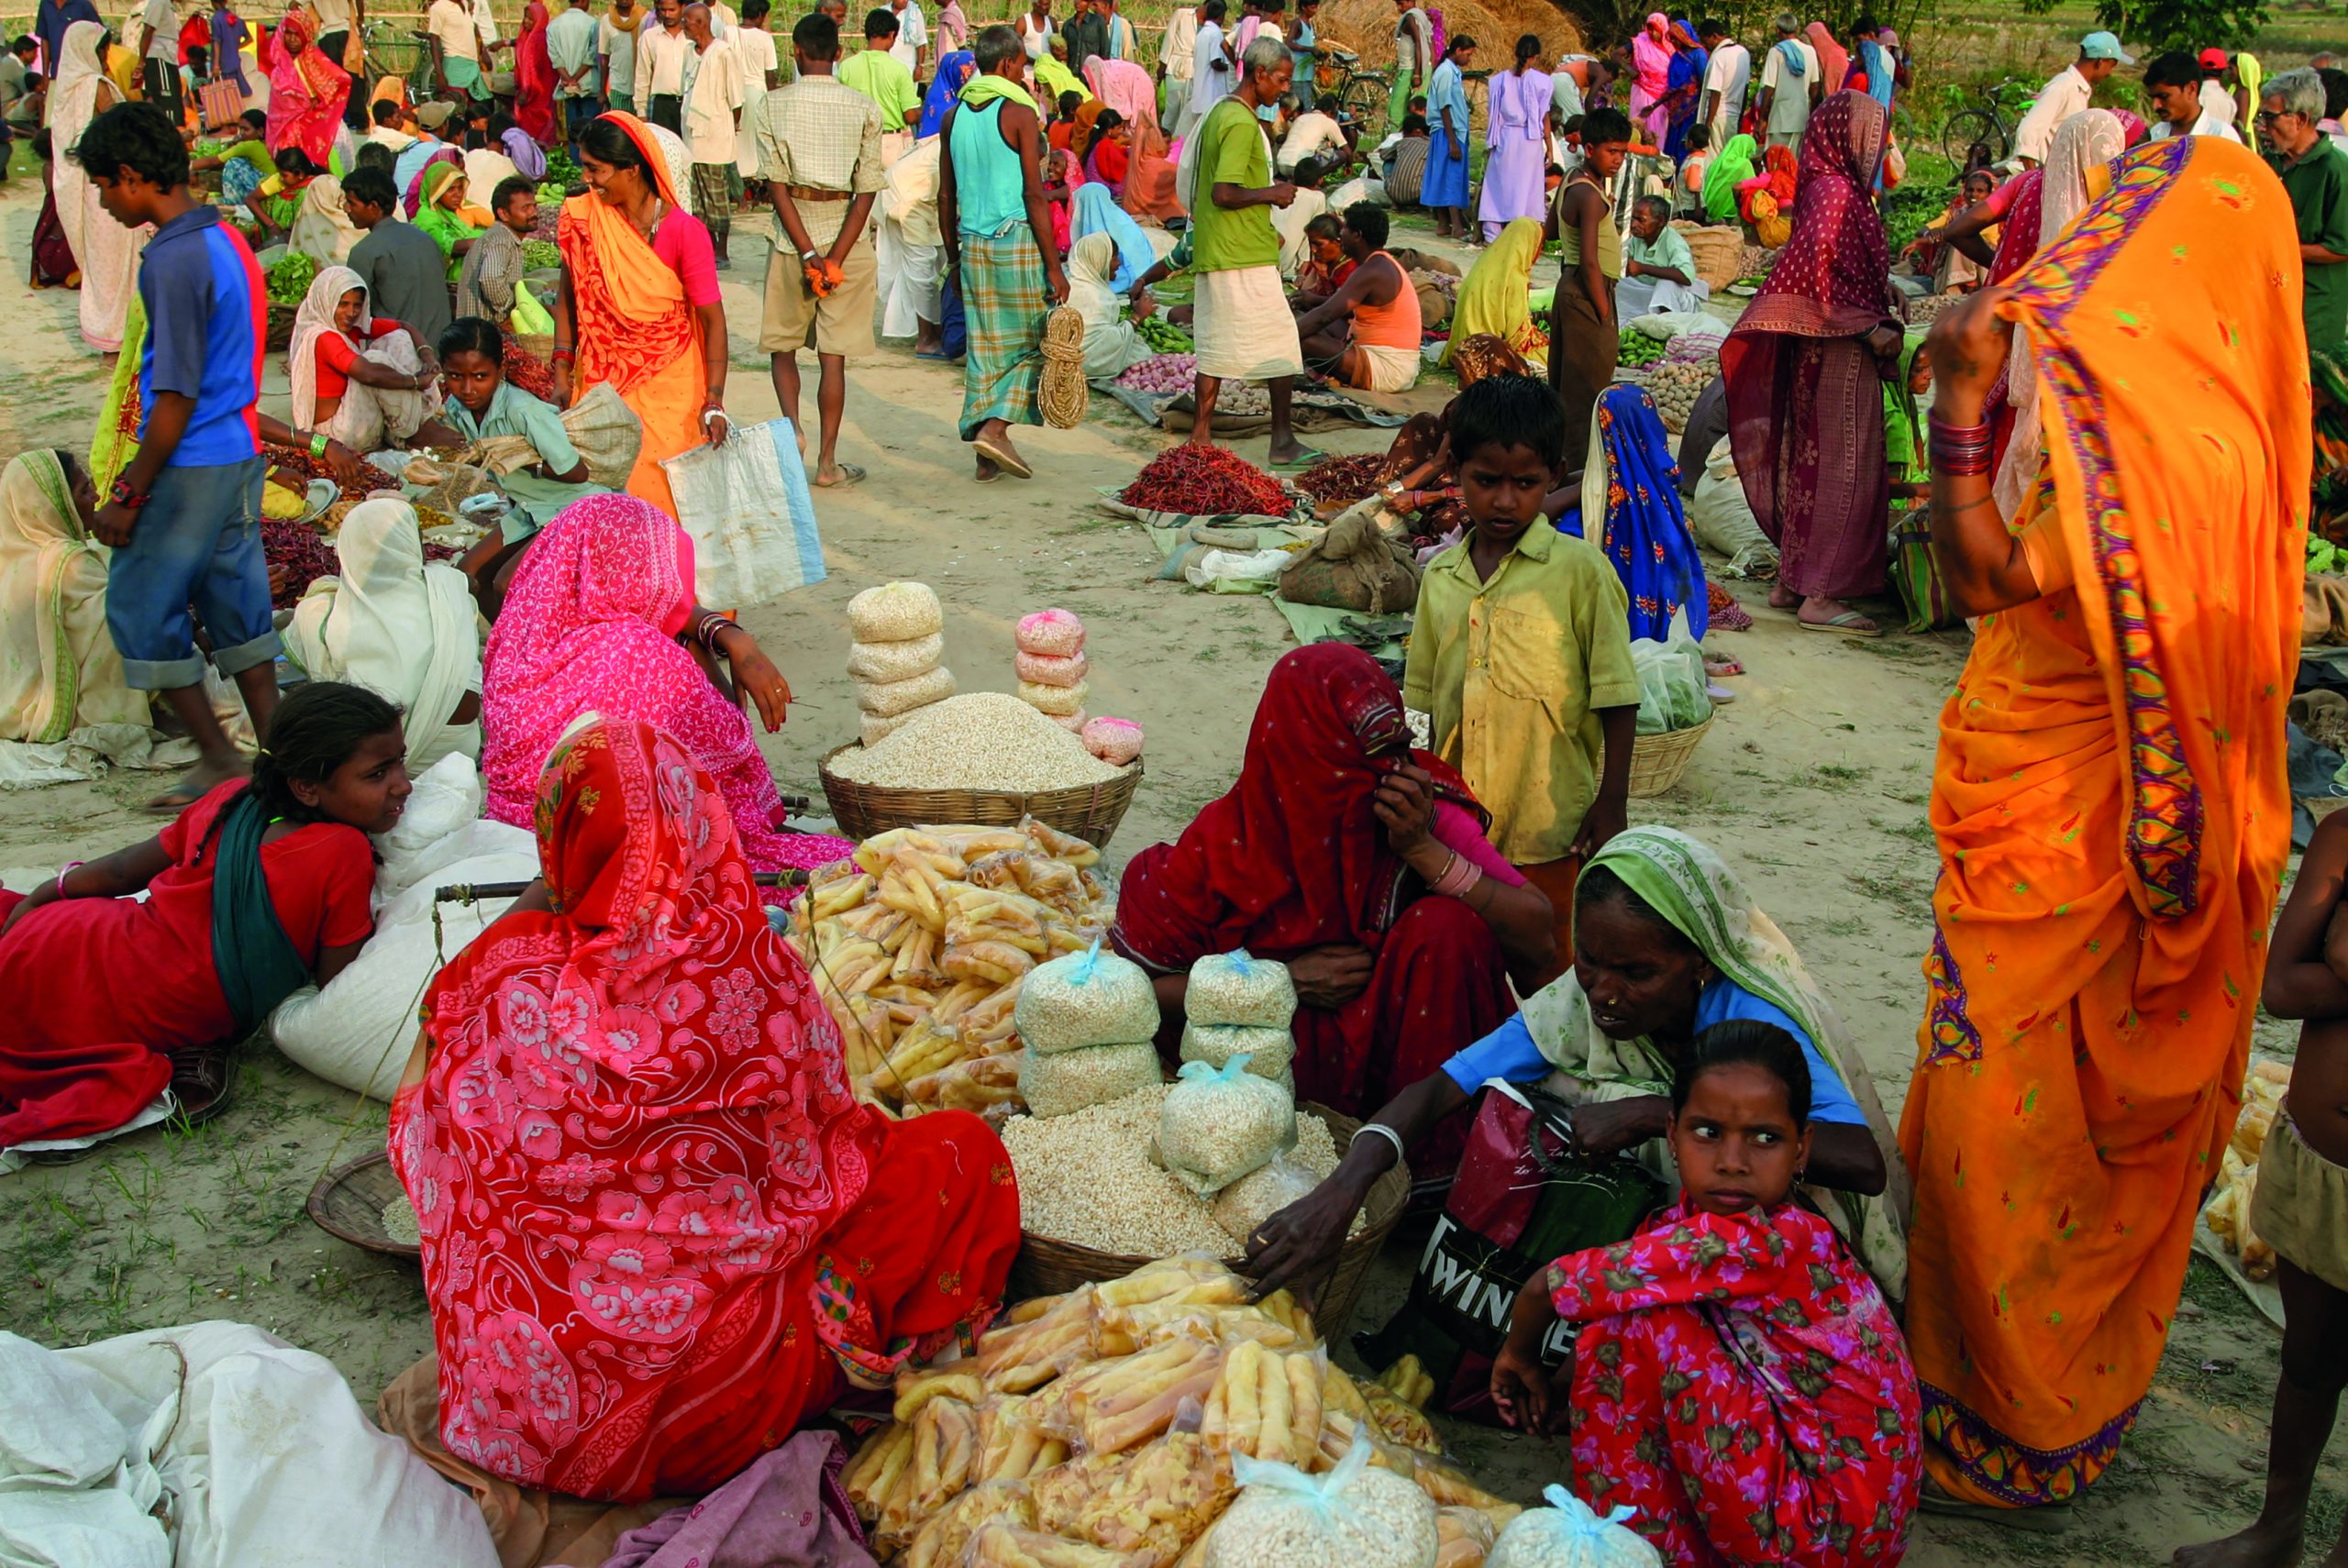 A lively view of the market. People are colourfully dressed and some are sitting on the ground. There are items for sale on the blankets, such as food.